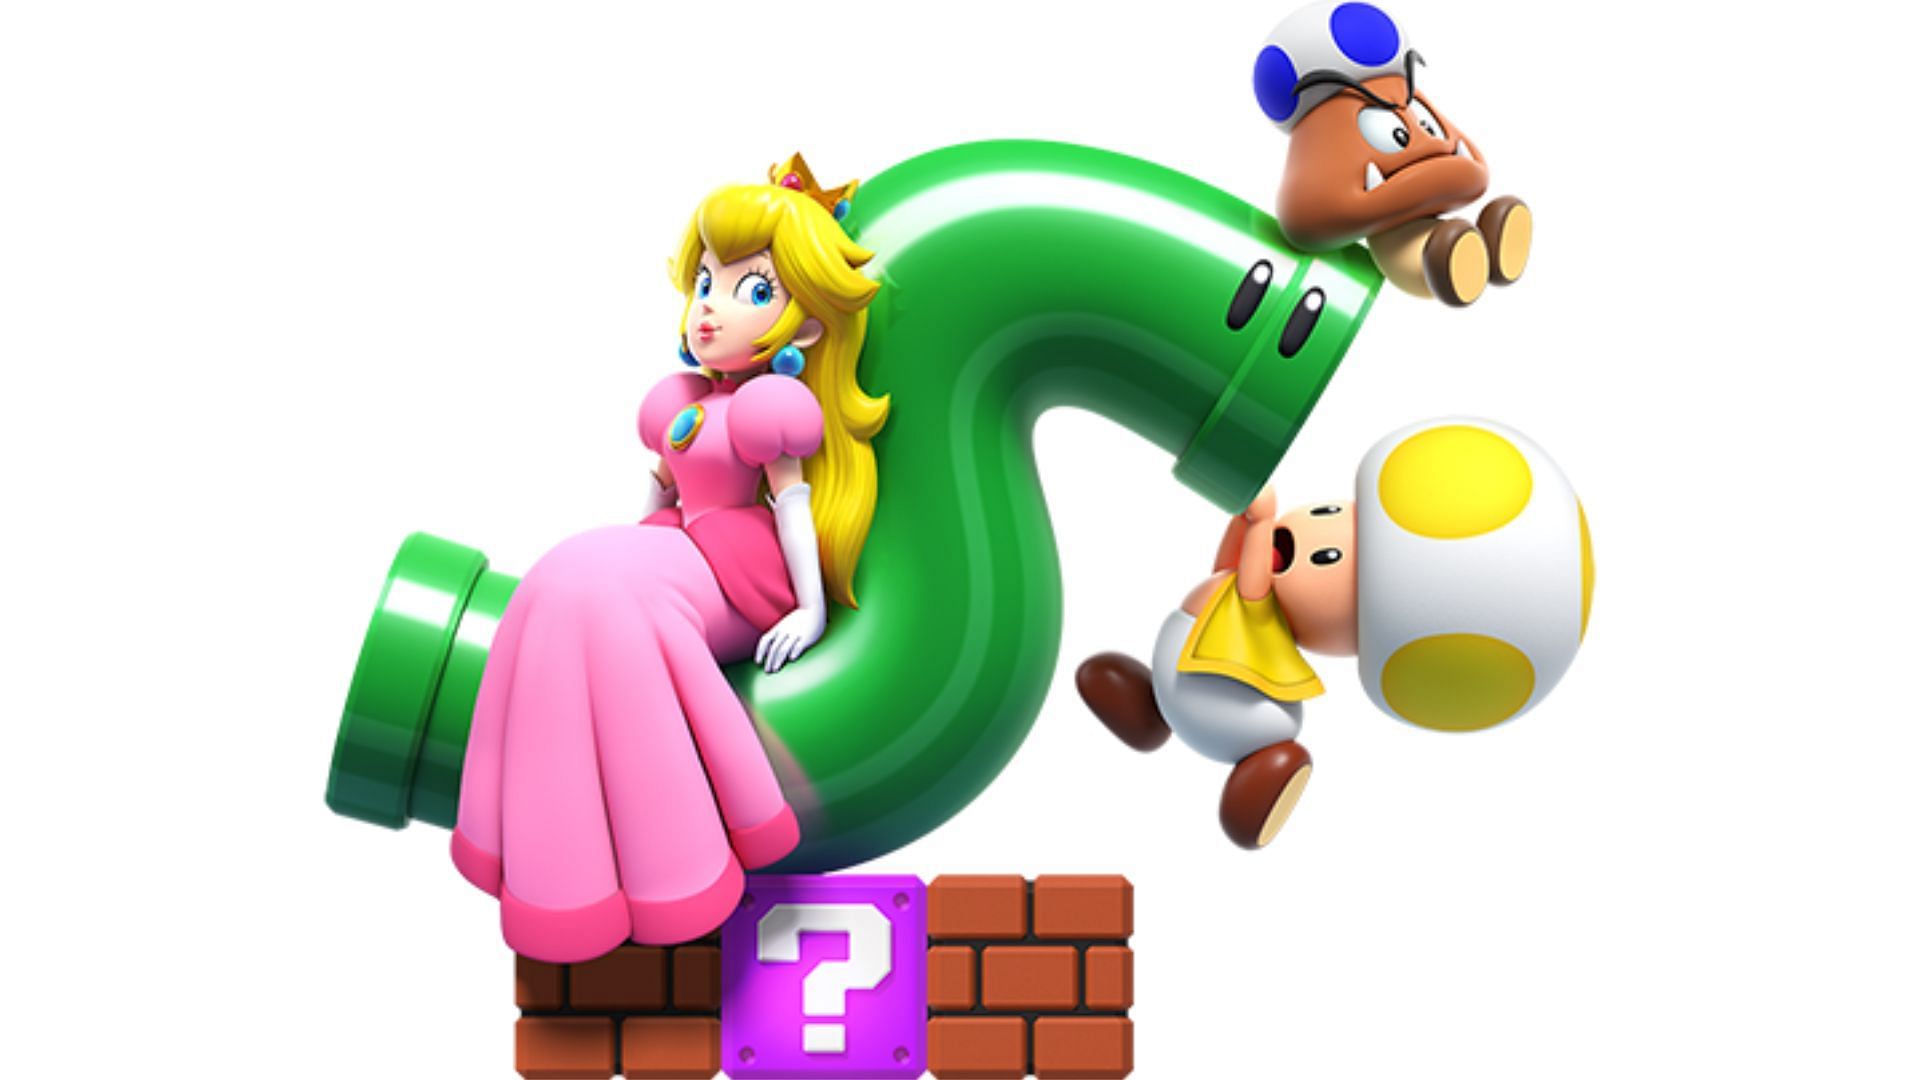 The actress behind Peach plays many characters (Image via Nintendo)